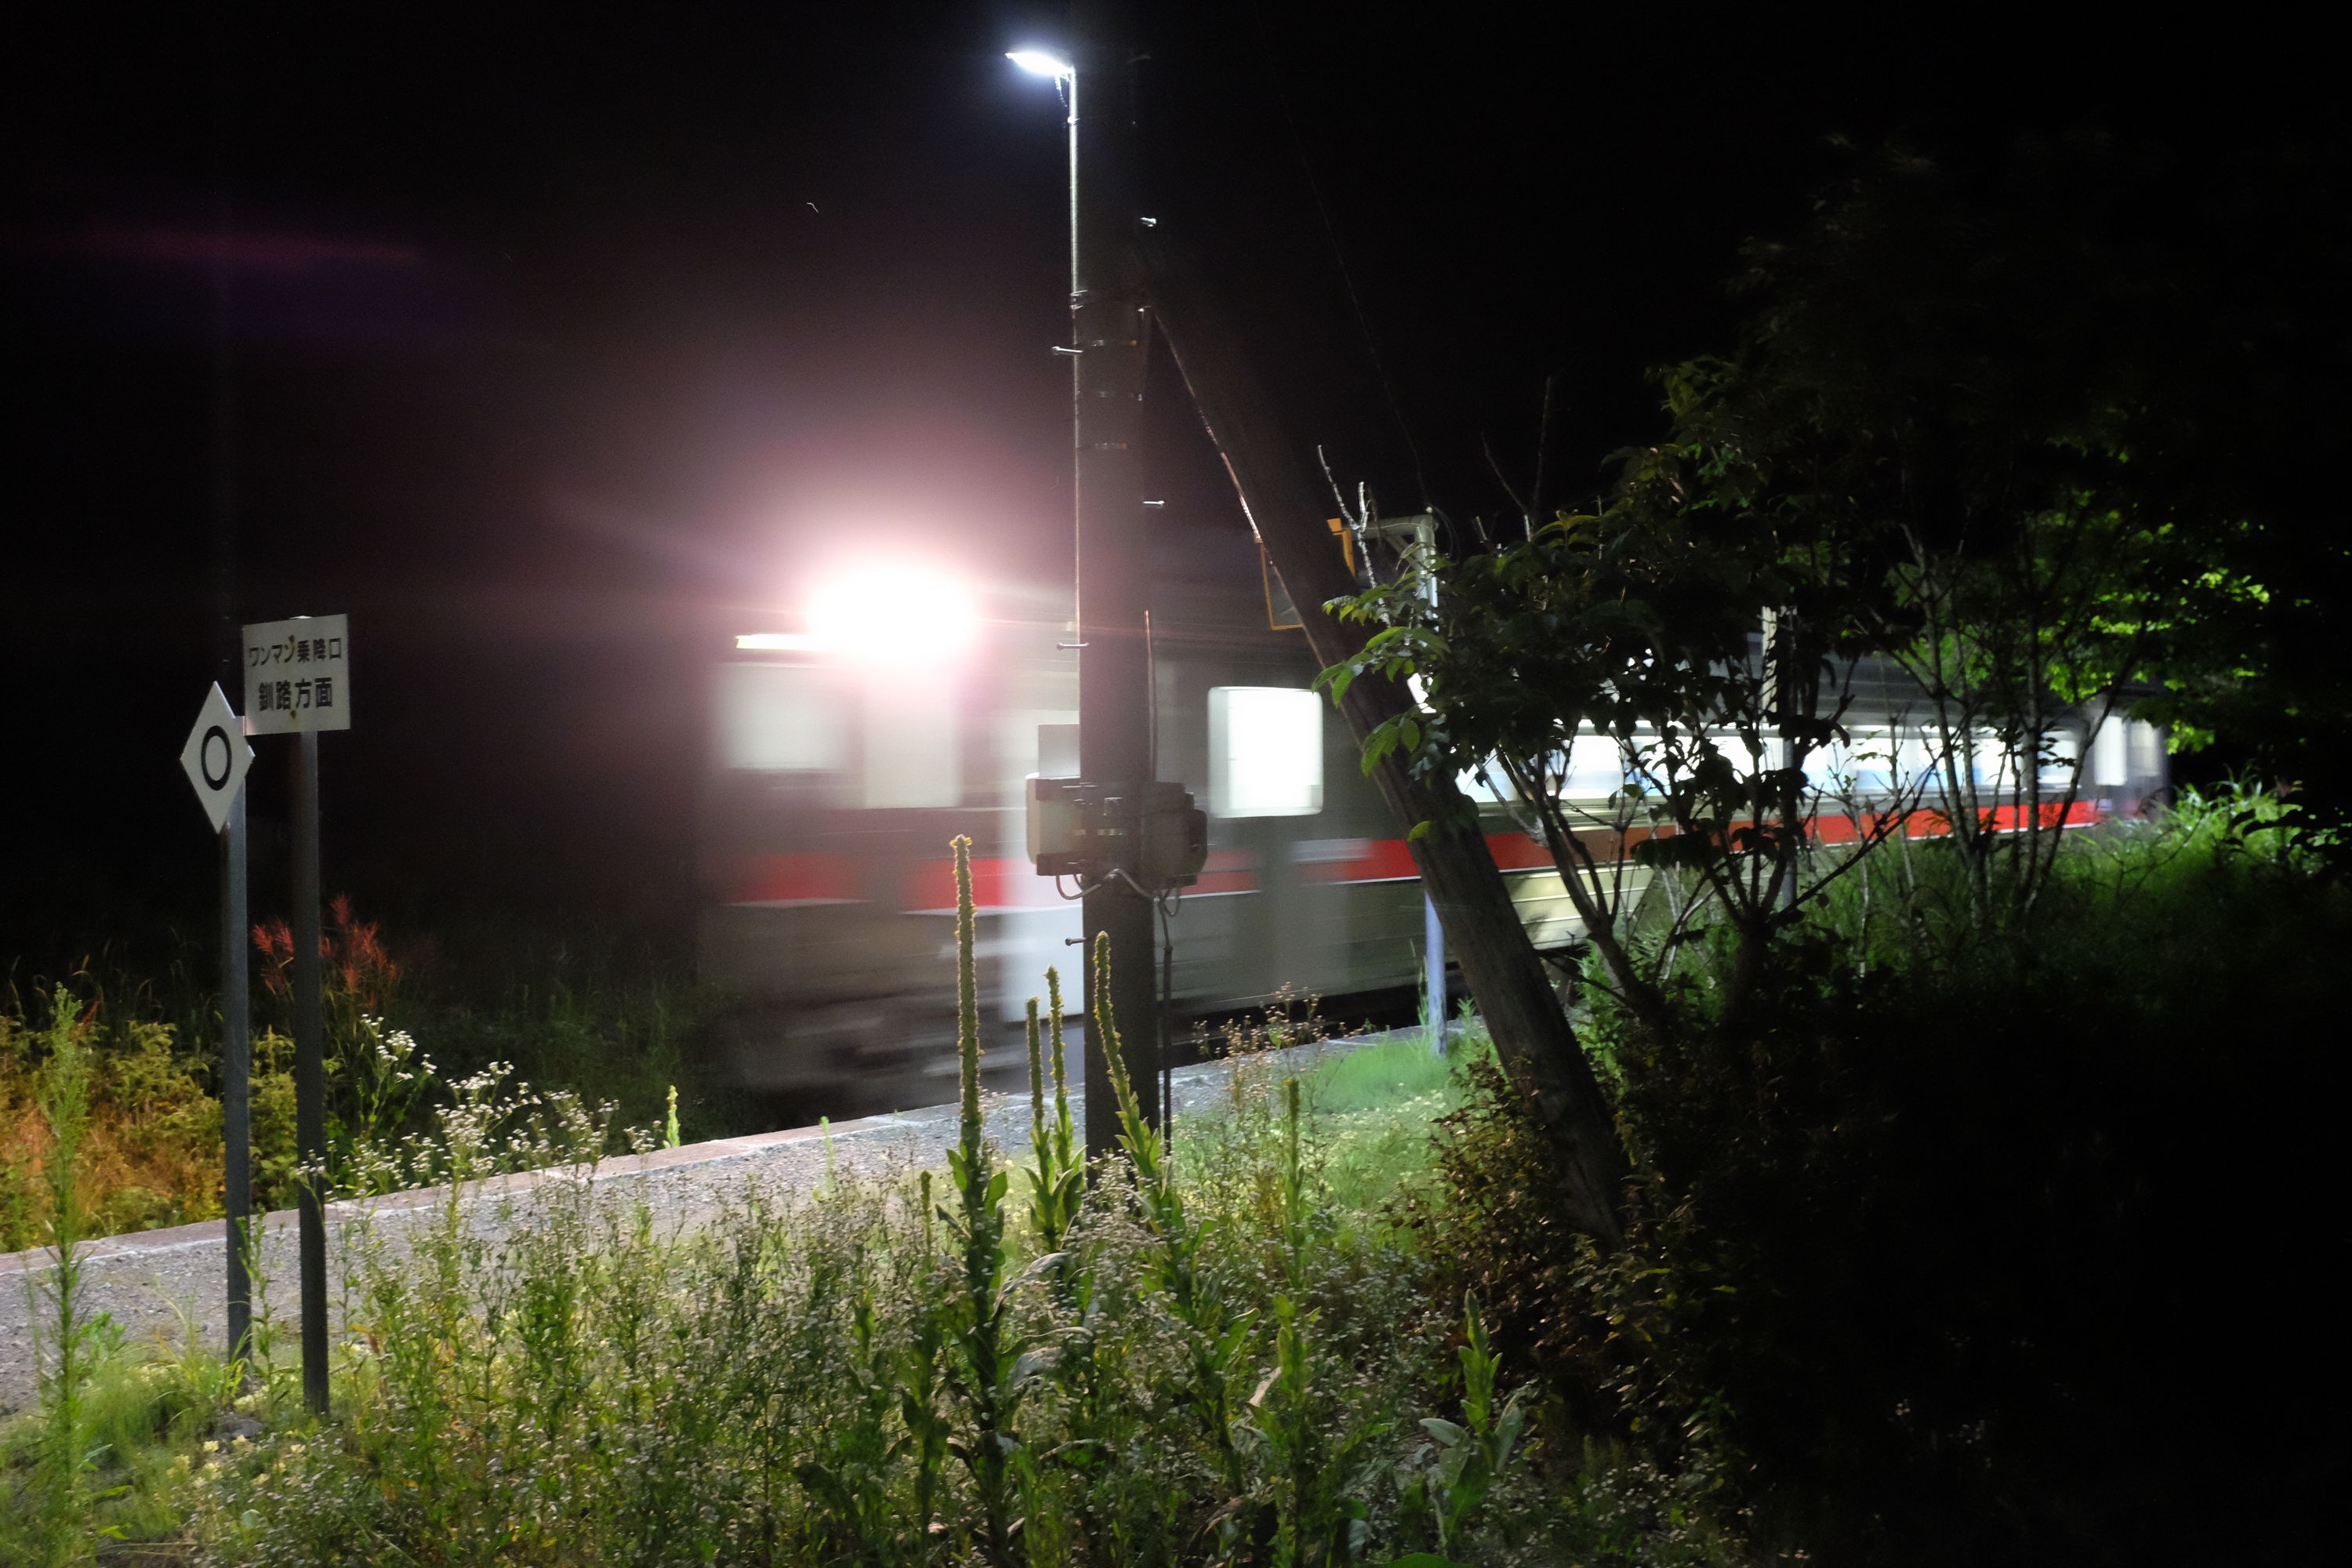 A small train passes by in the night.